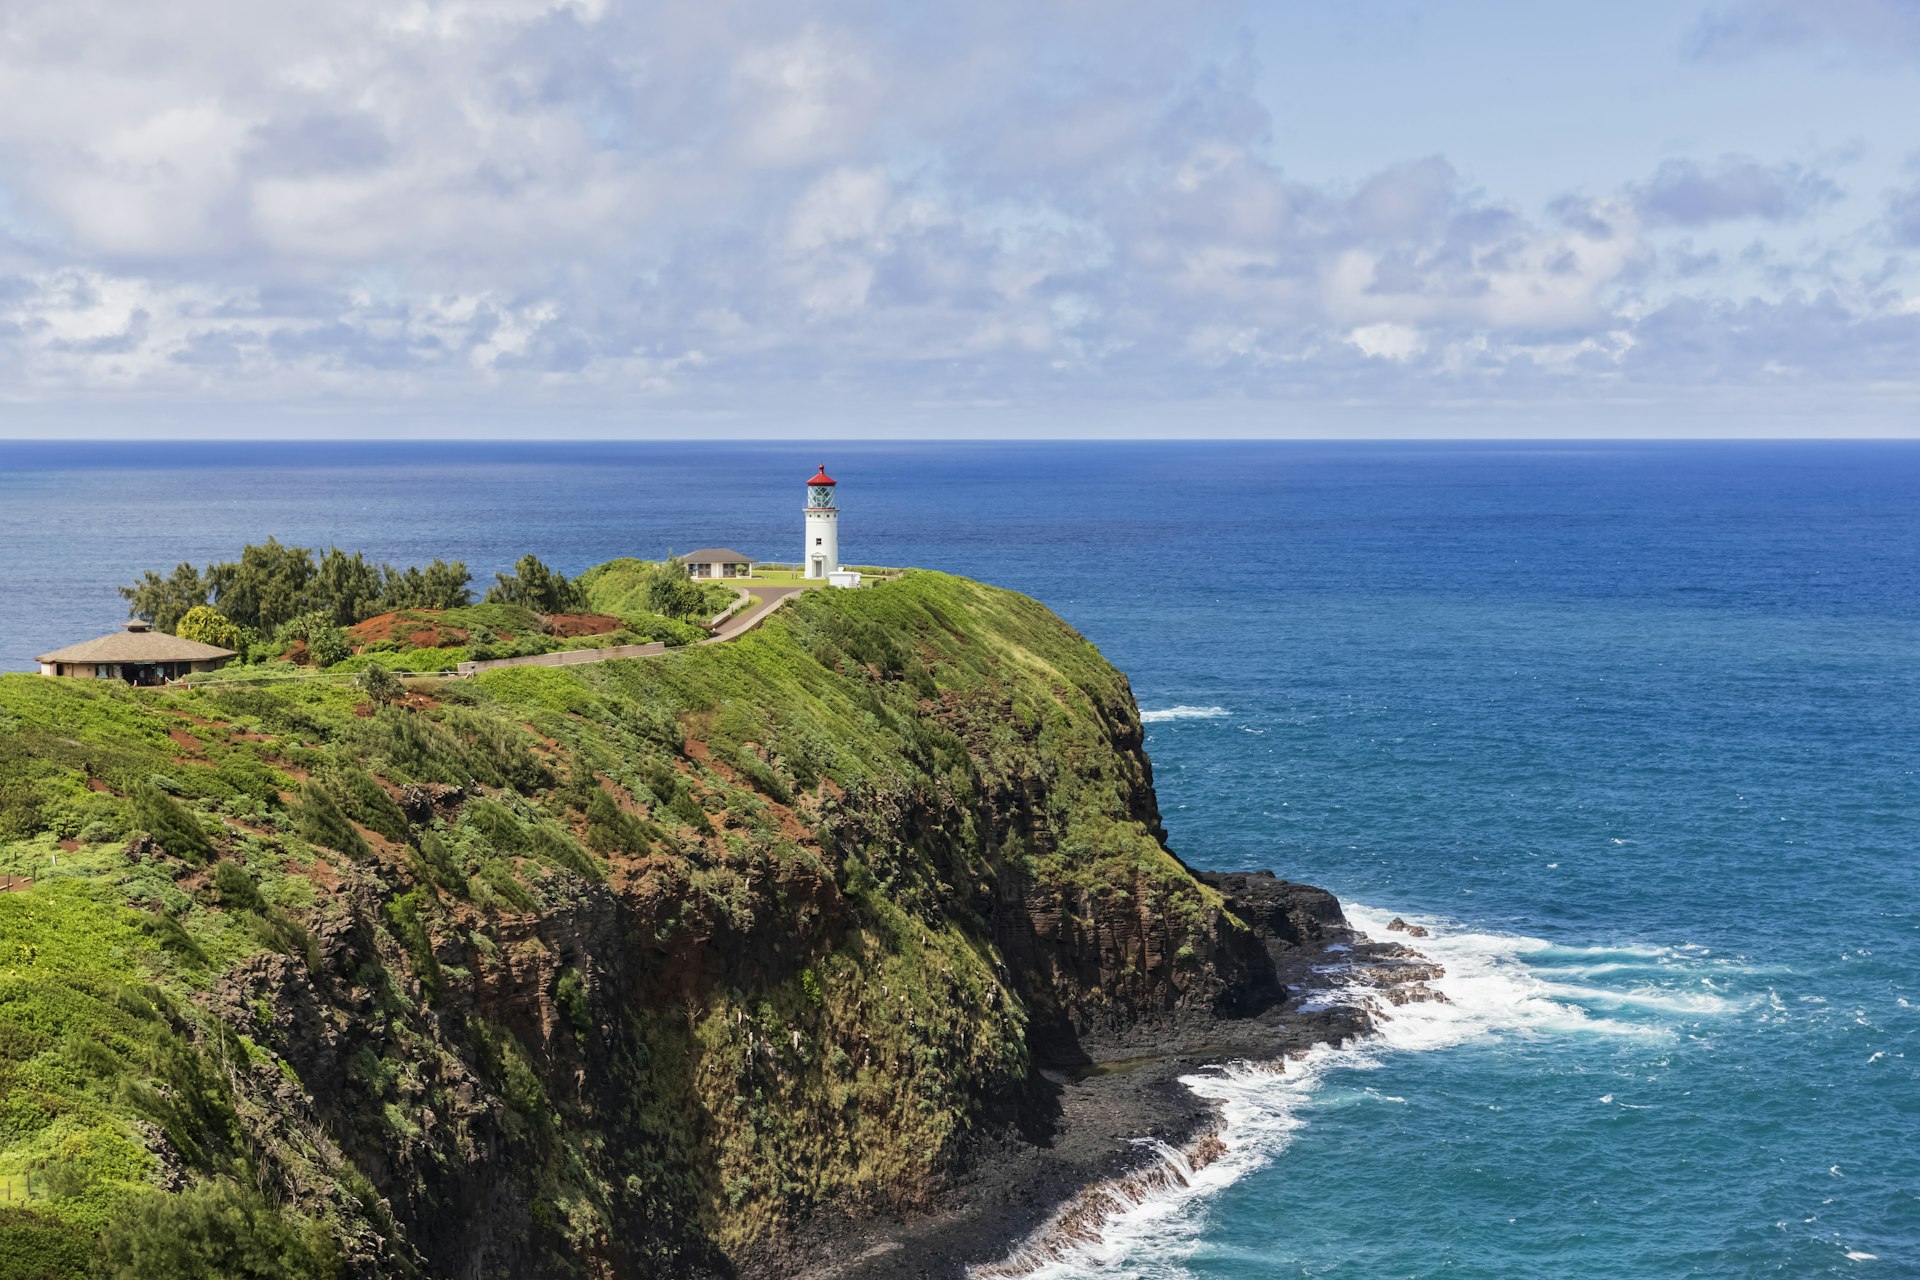 An aerial view of the lighthouse overlooking the cliffs and Pacific Ocean at Kilauea Point National Wildlife Refuge, Kaua‘i